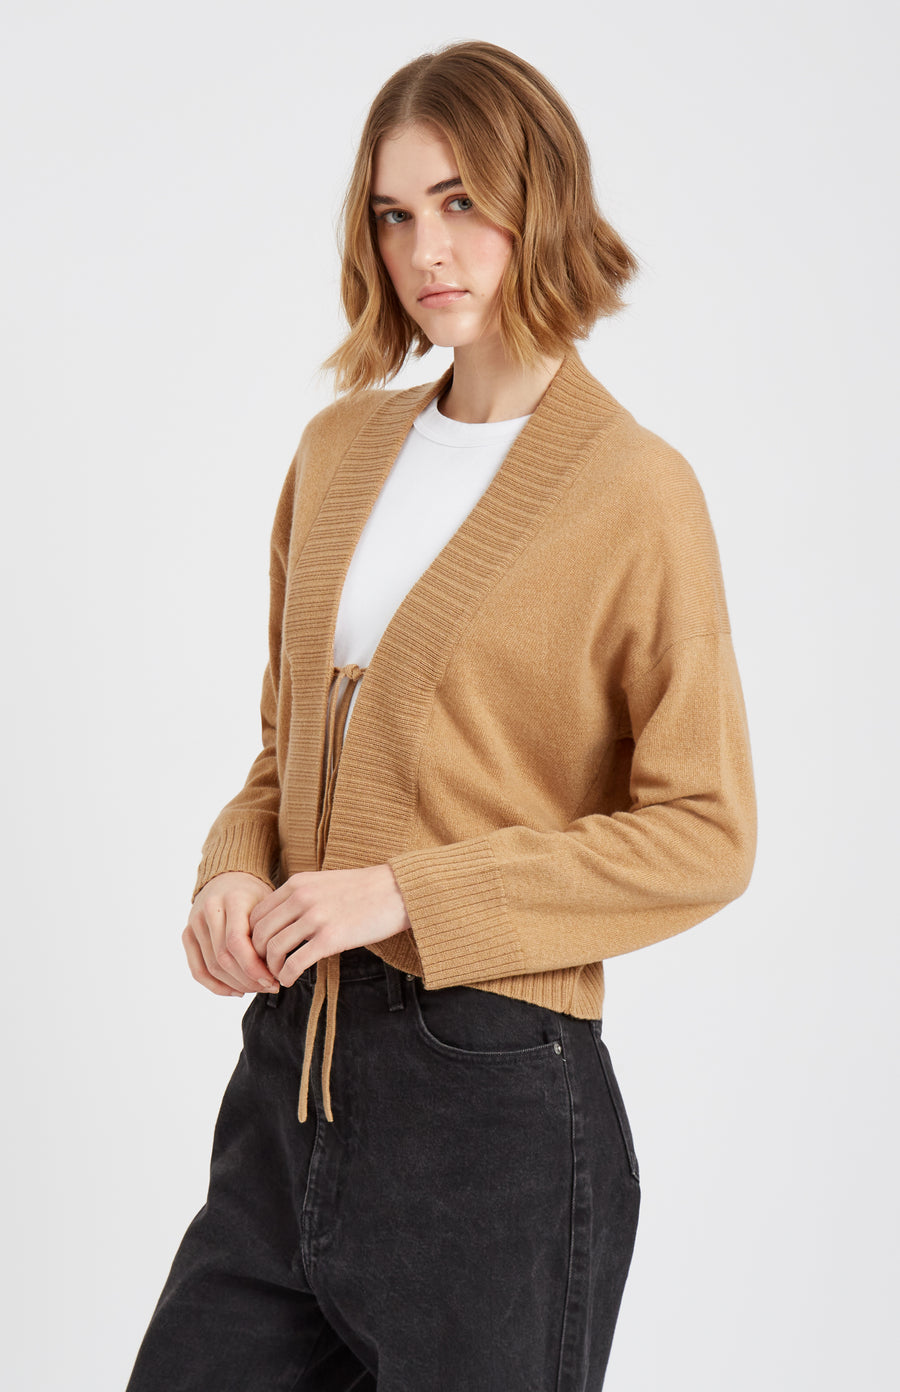 Women's Lightweight Cashmere Open Cardigan with Tie in Sand